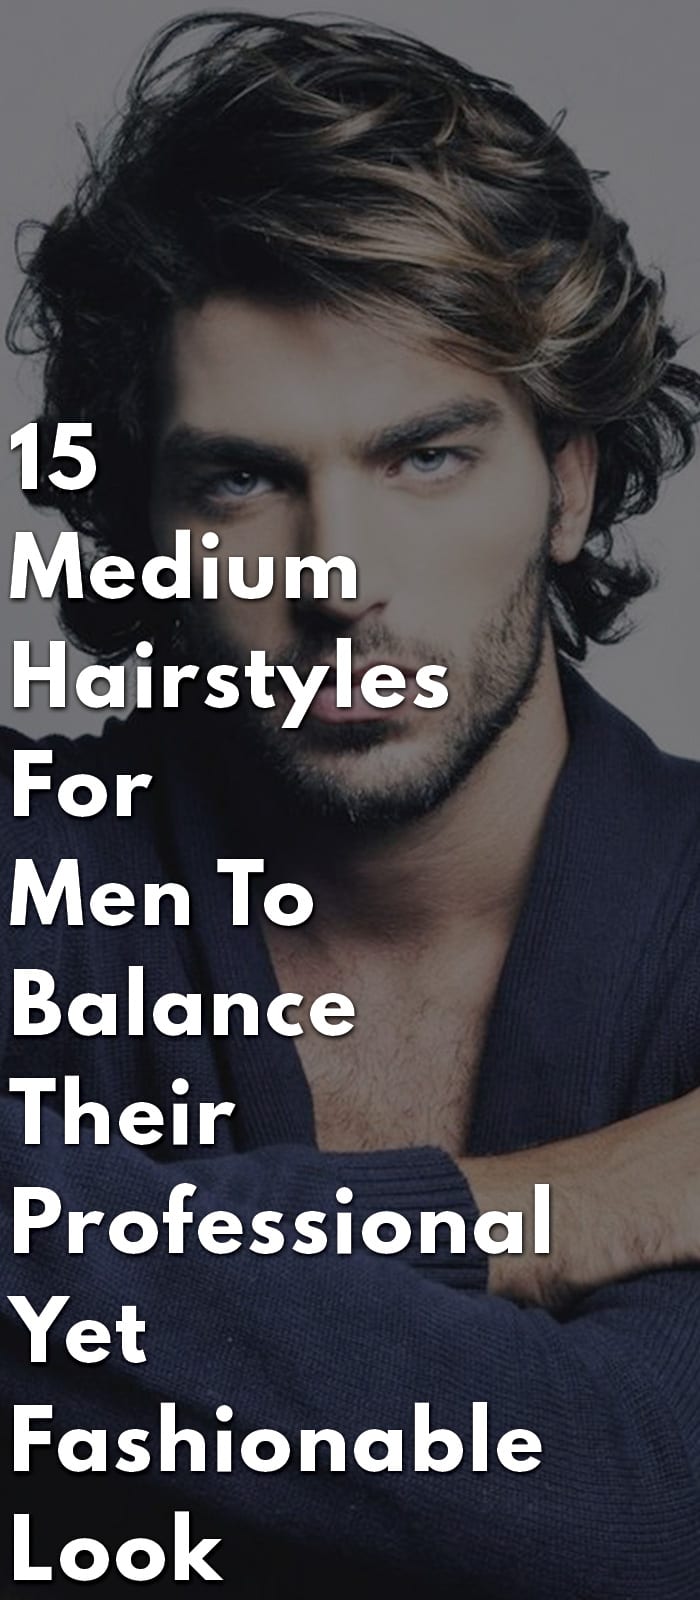 15-Medium-Hairstyles-For-Men-To-Balance-Their-Professional-Yet-Fashionable-Look